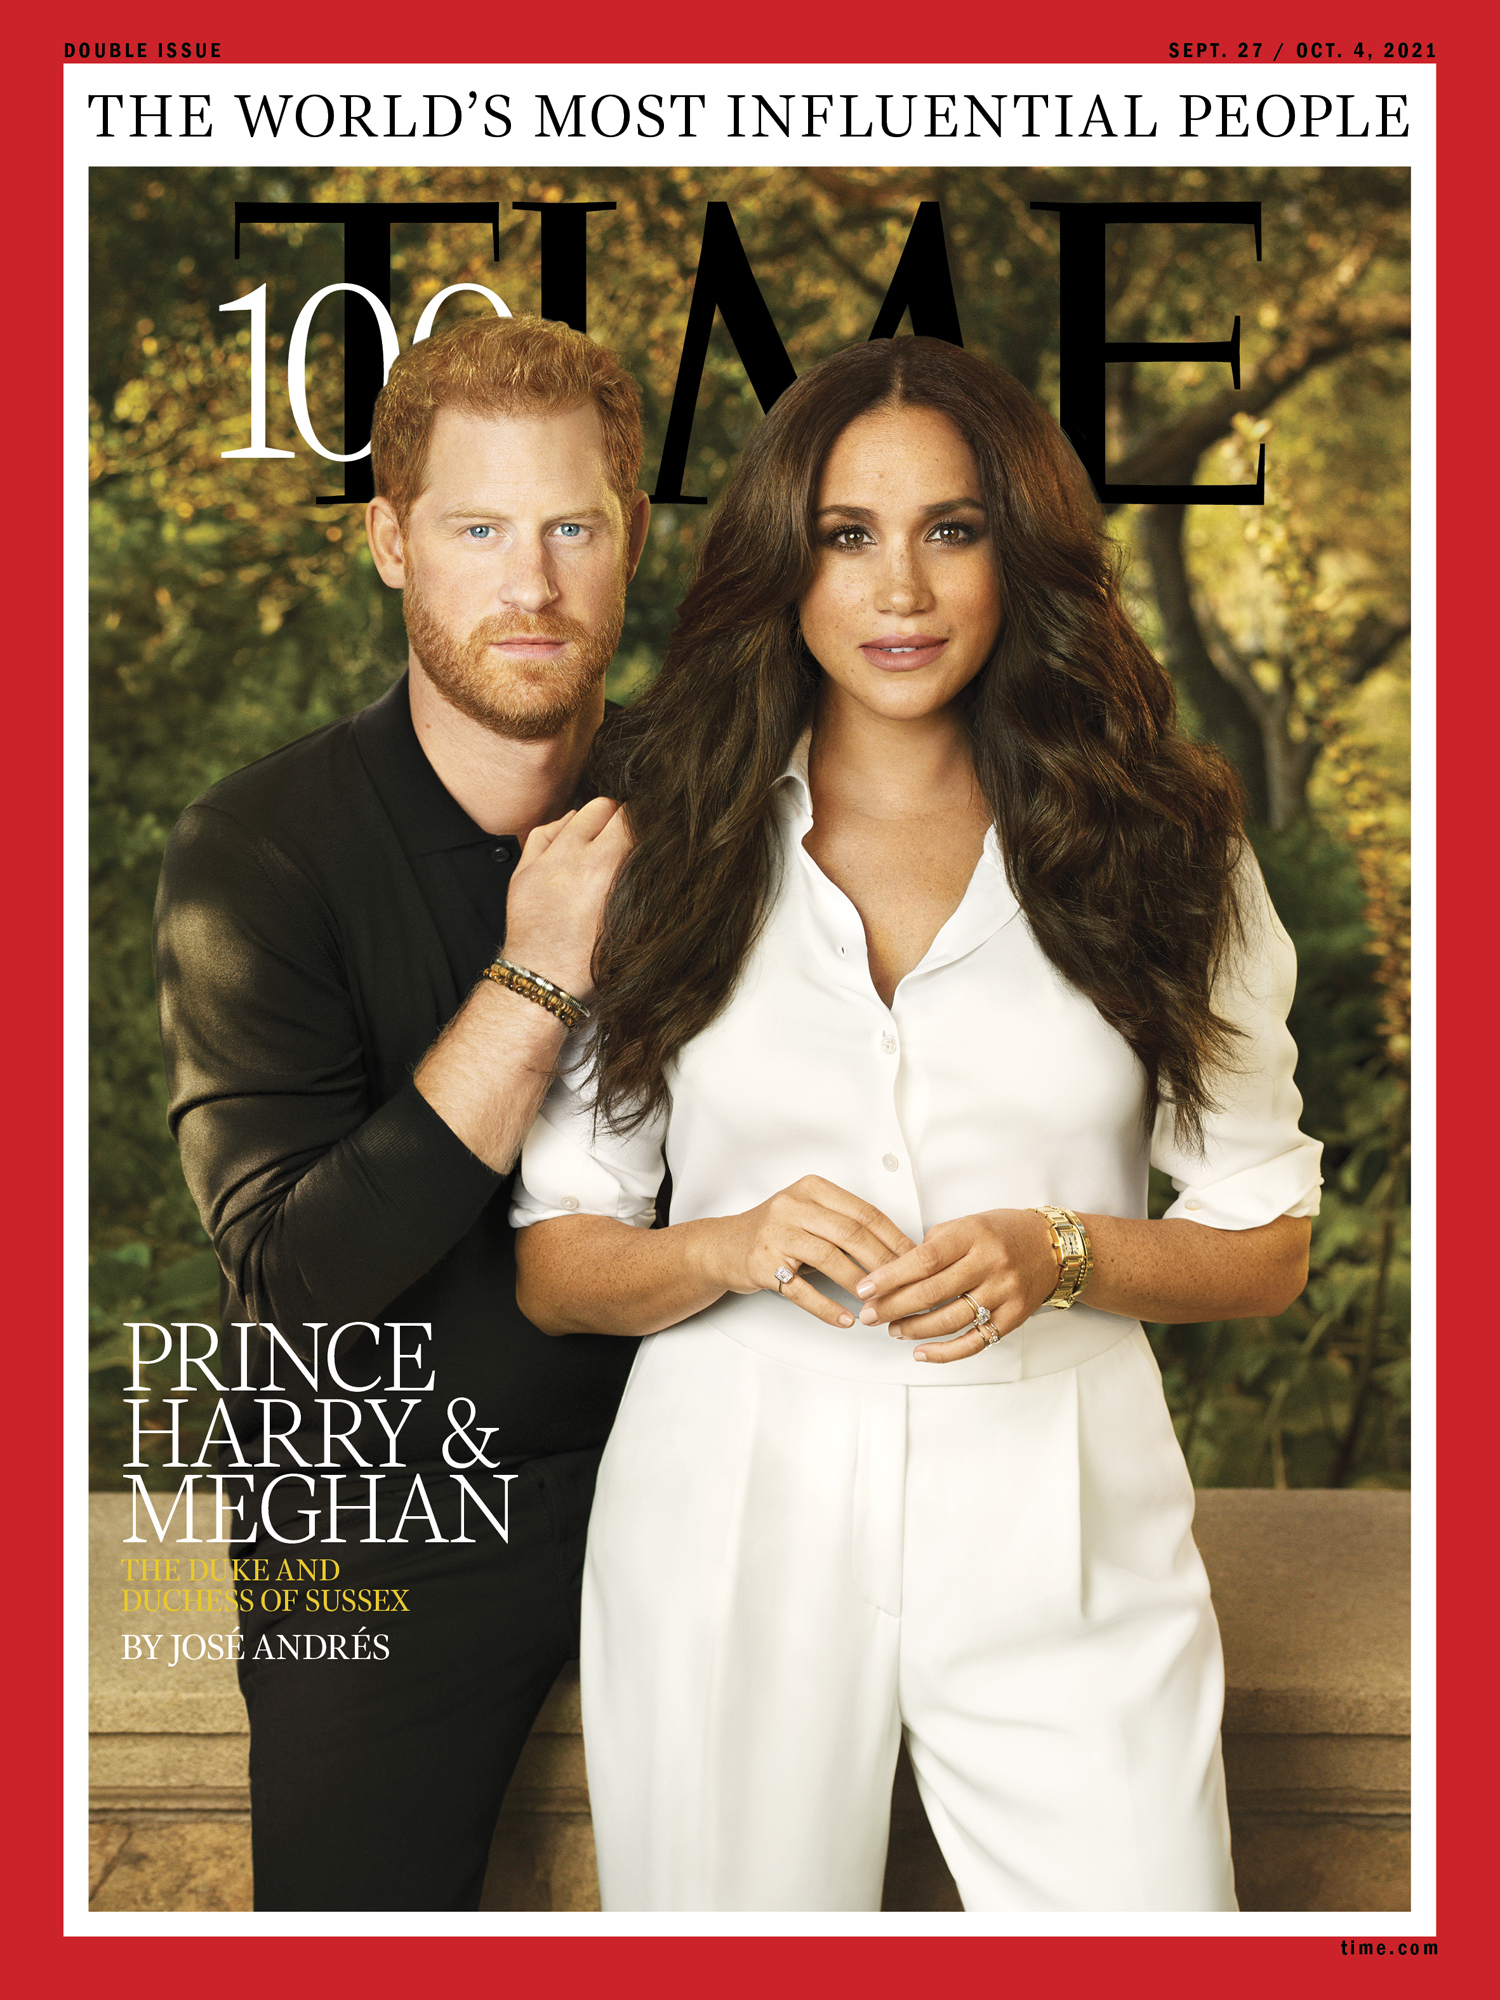 Prince Prince Harry and Meghan Markle's TIME 100 Photoshoot Making Prince William and Kate Middleton Tremble!